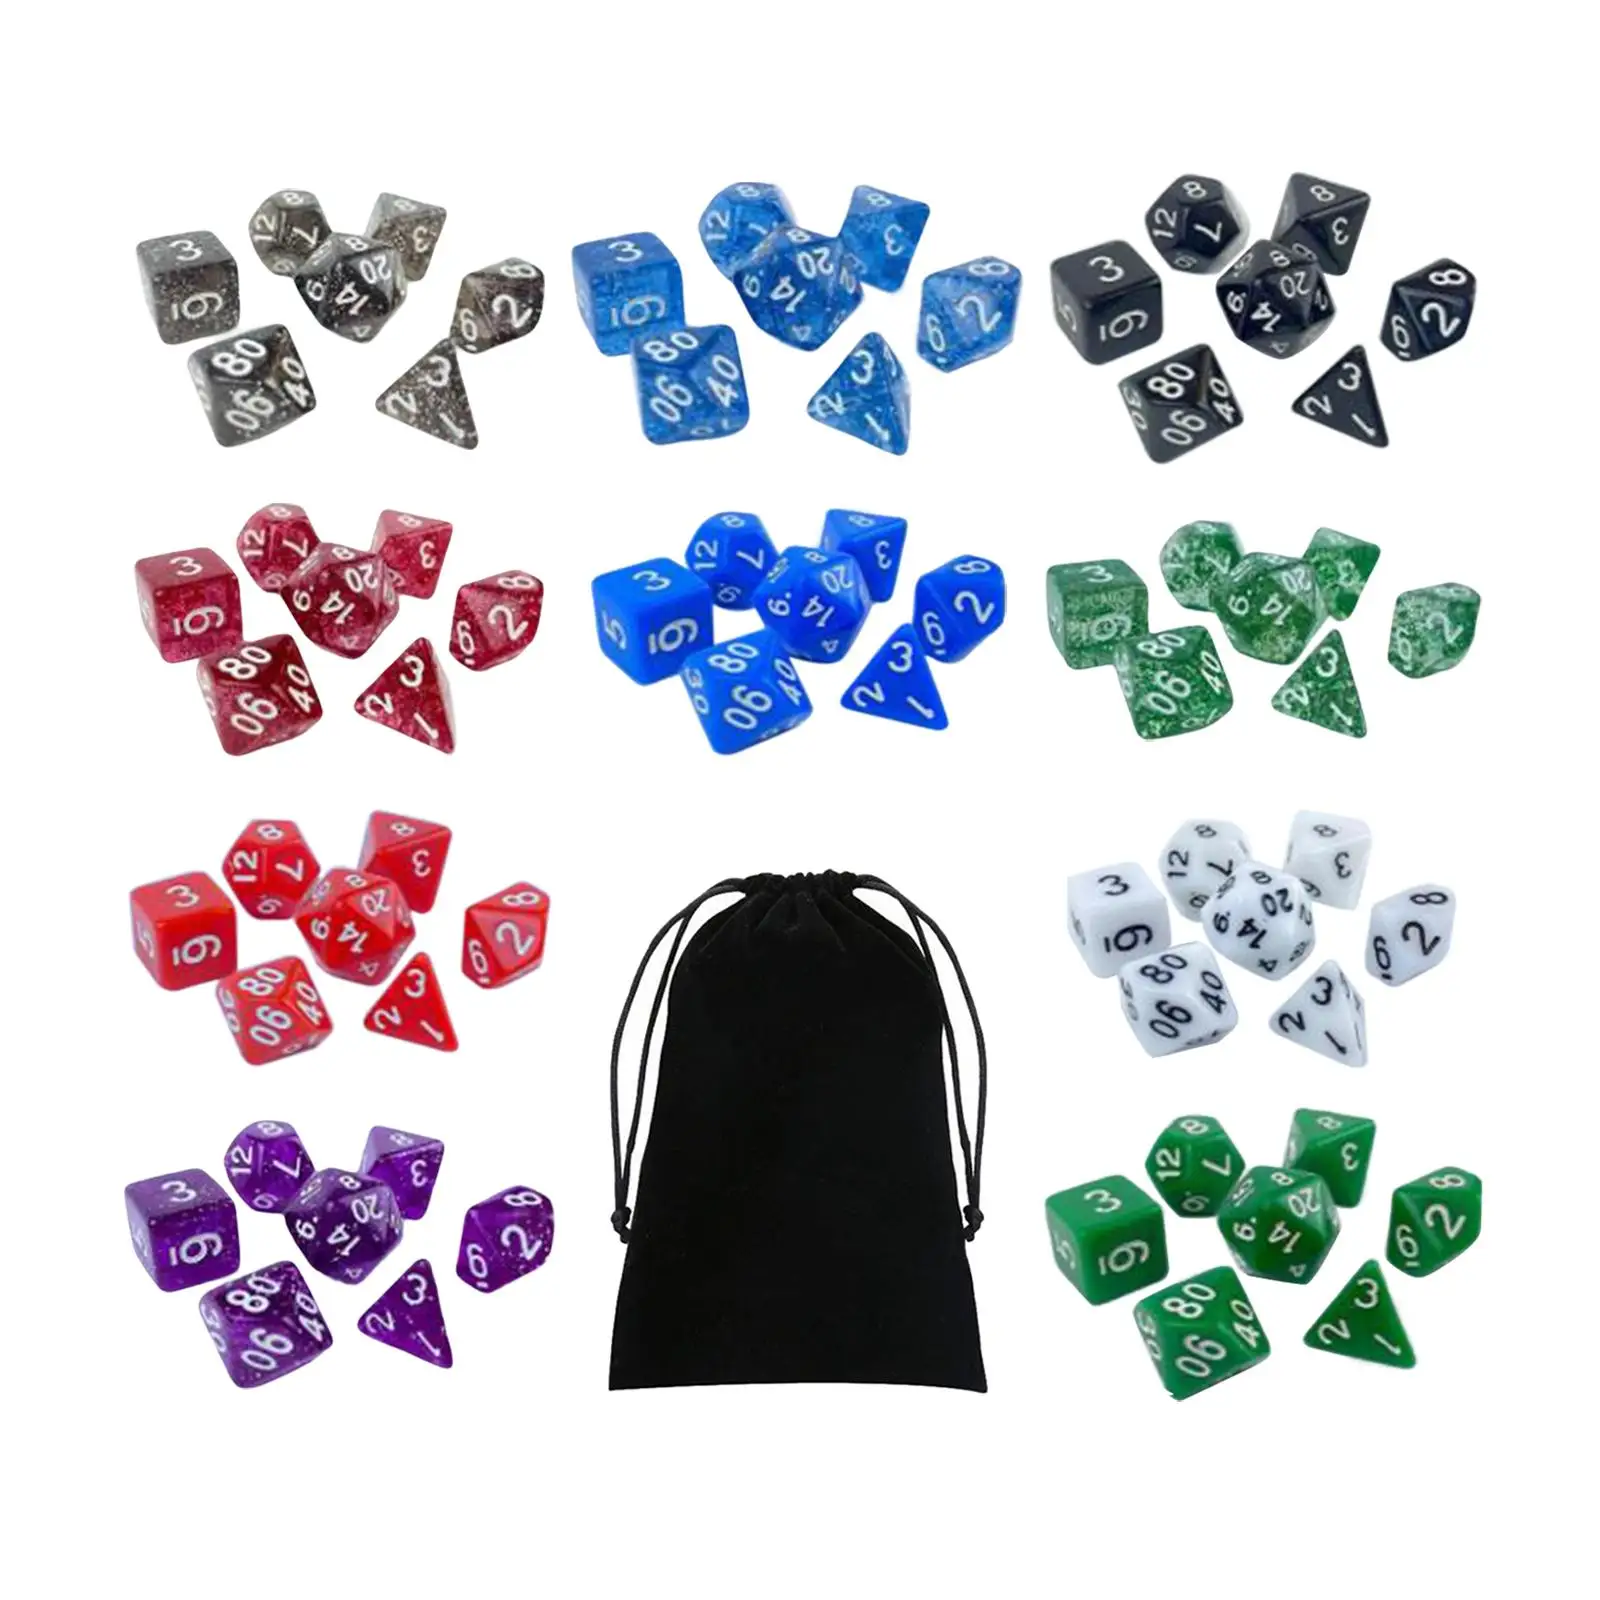 70Pcs Polyhedral   Board Game Props Toy Polyhedral   Set for D20